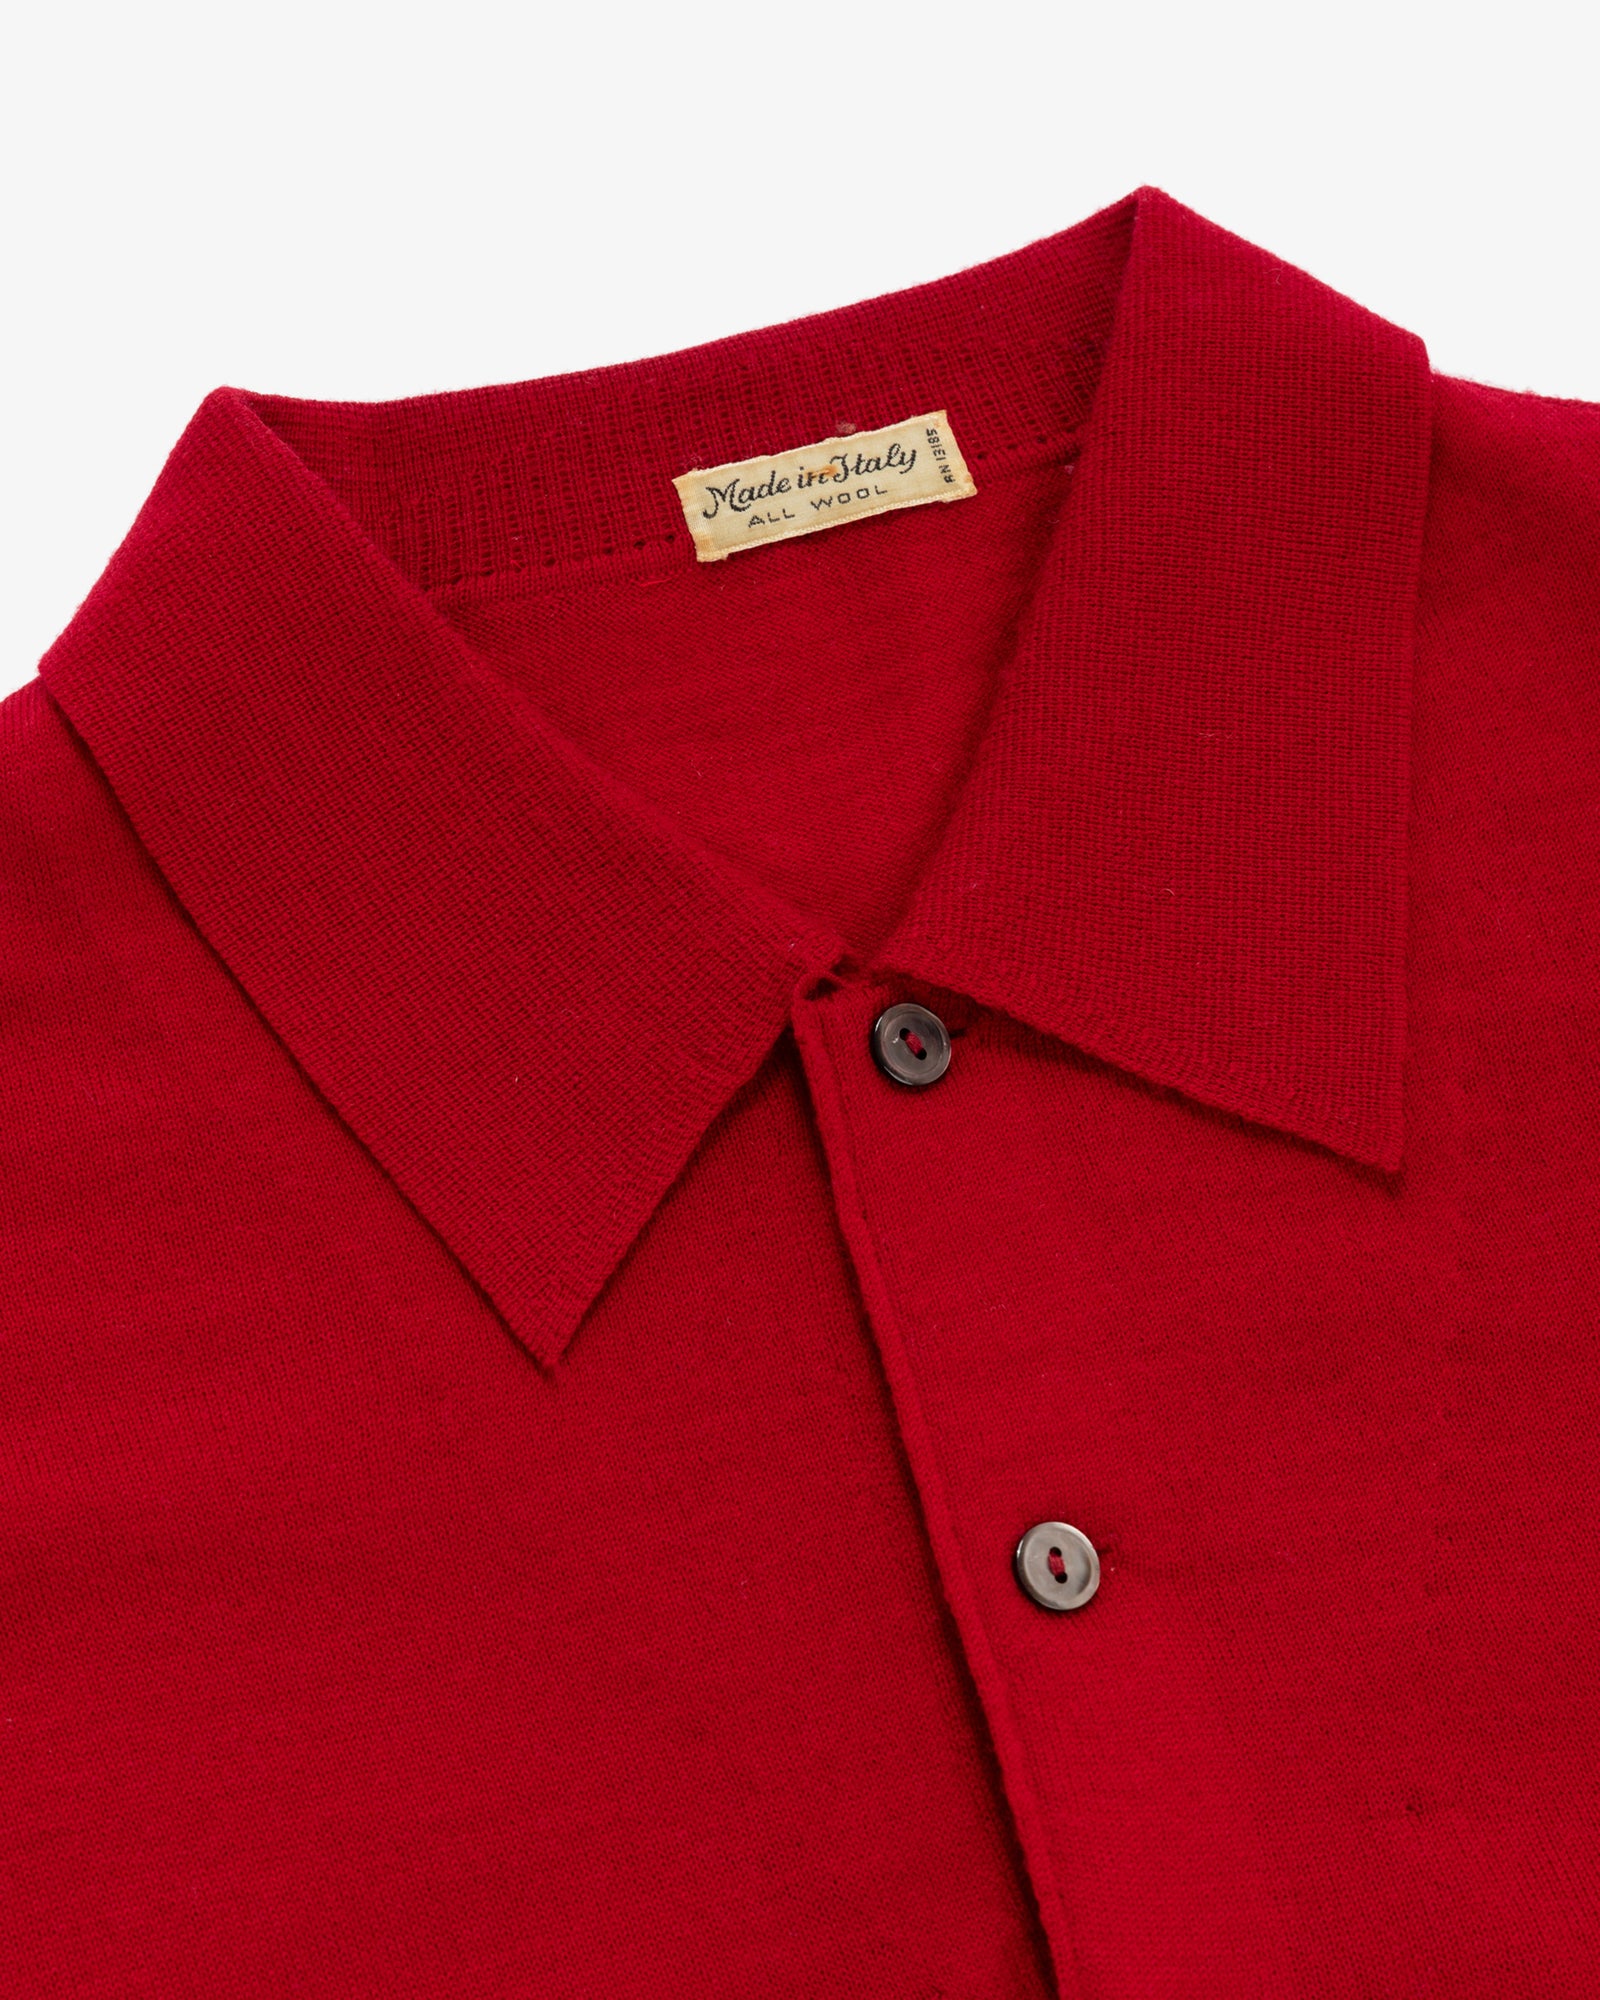 Vintage Wool Sweater Polo